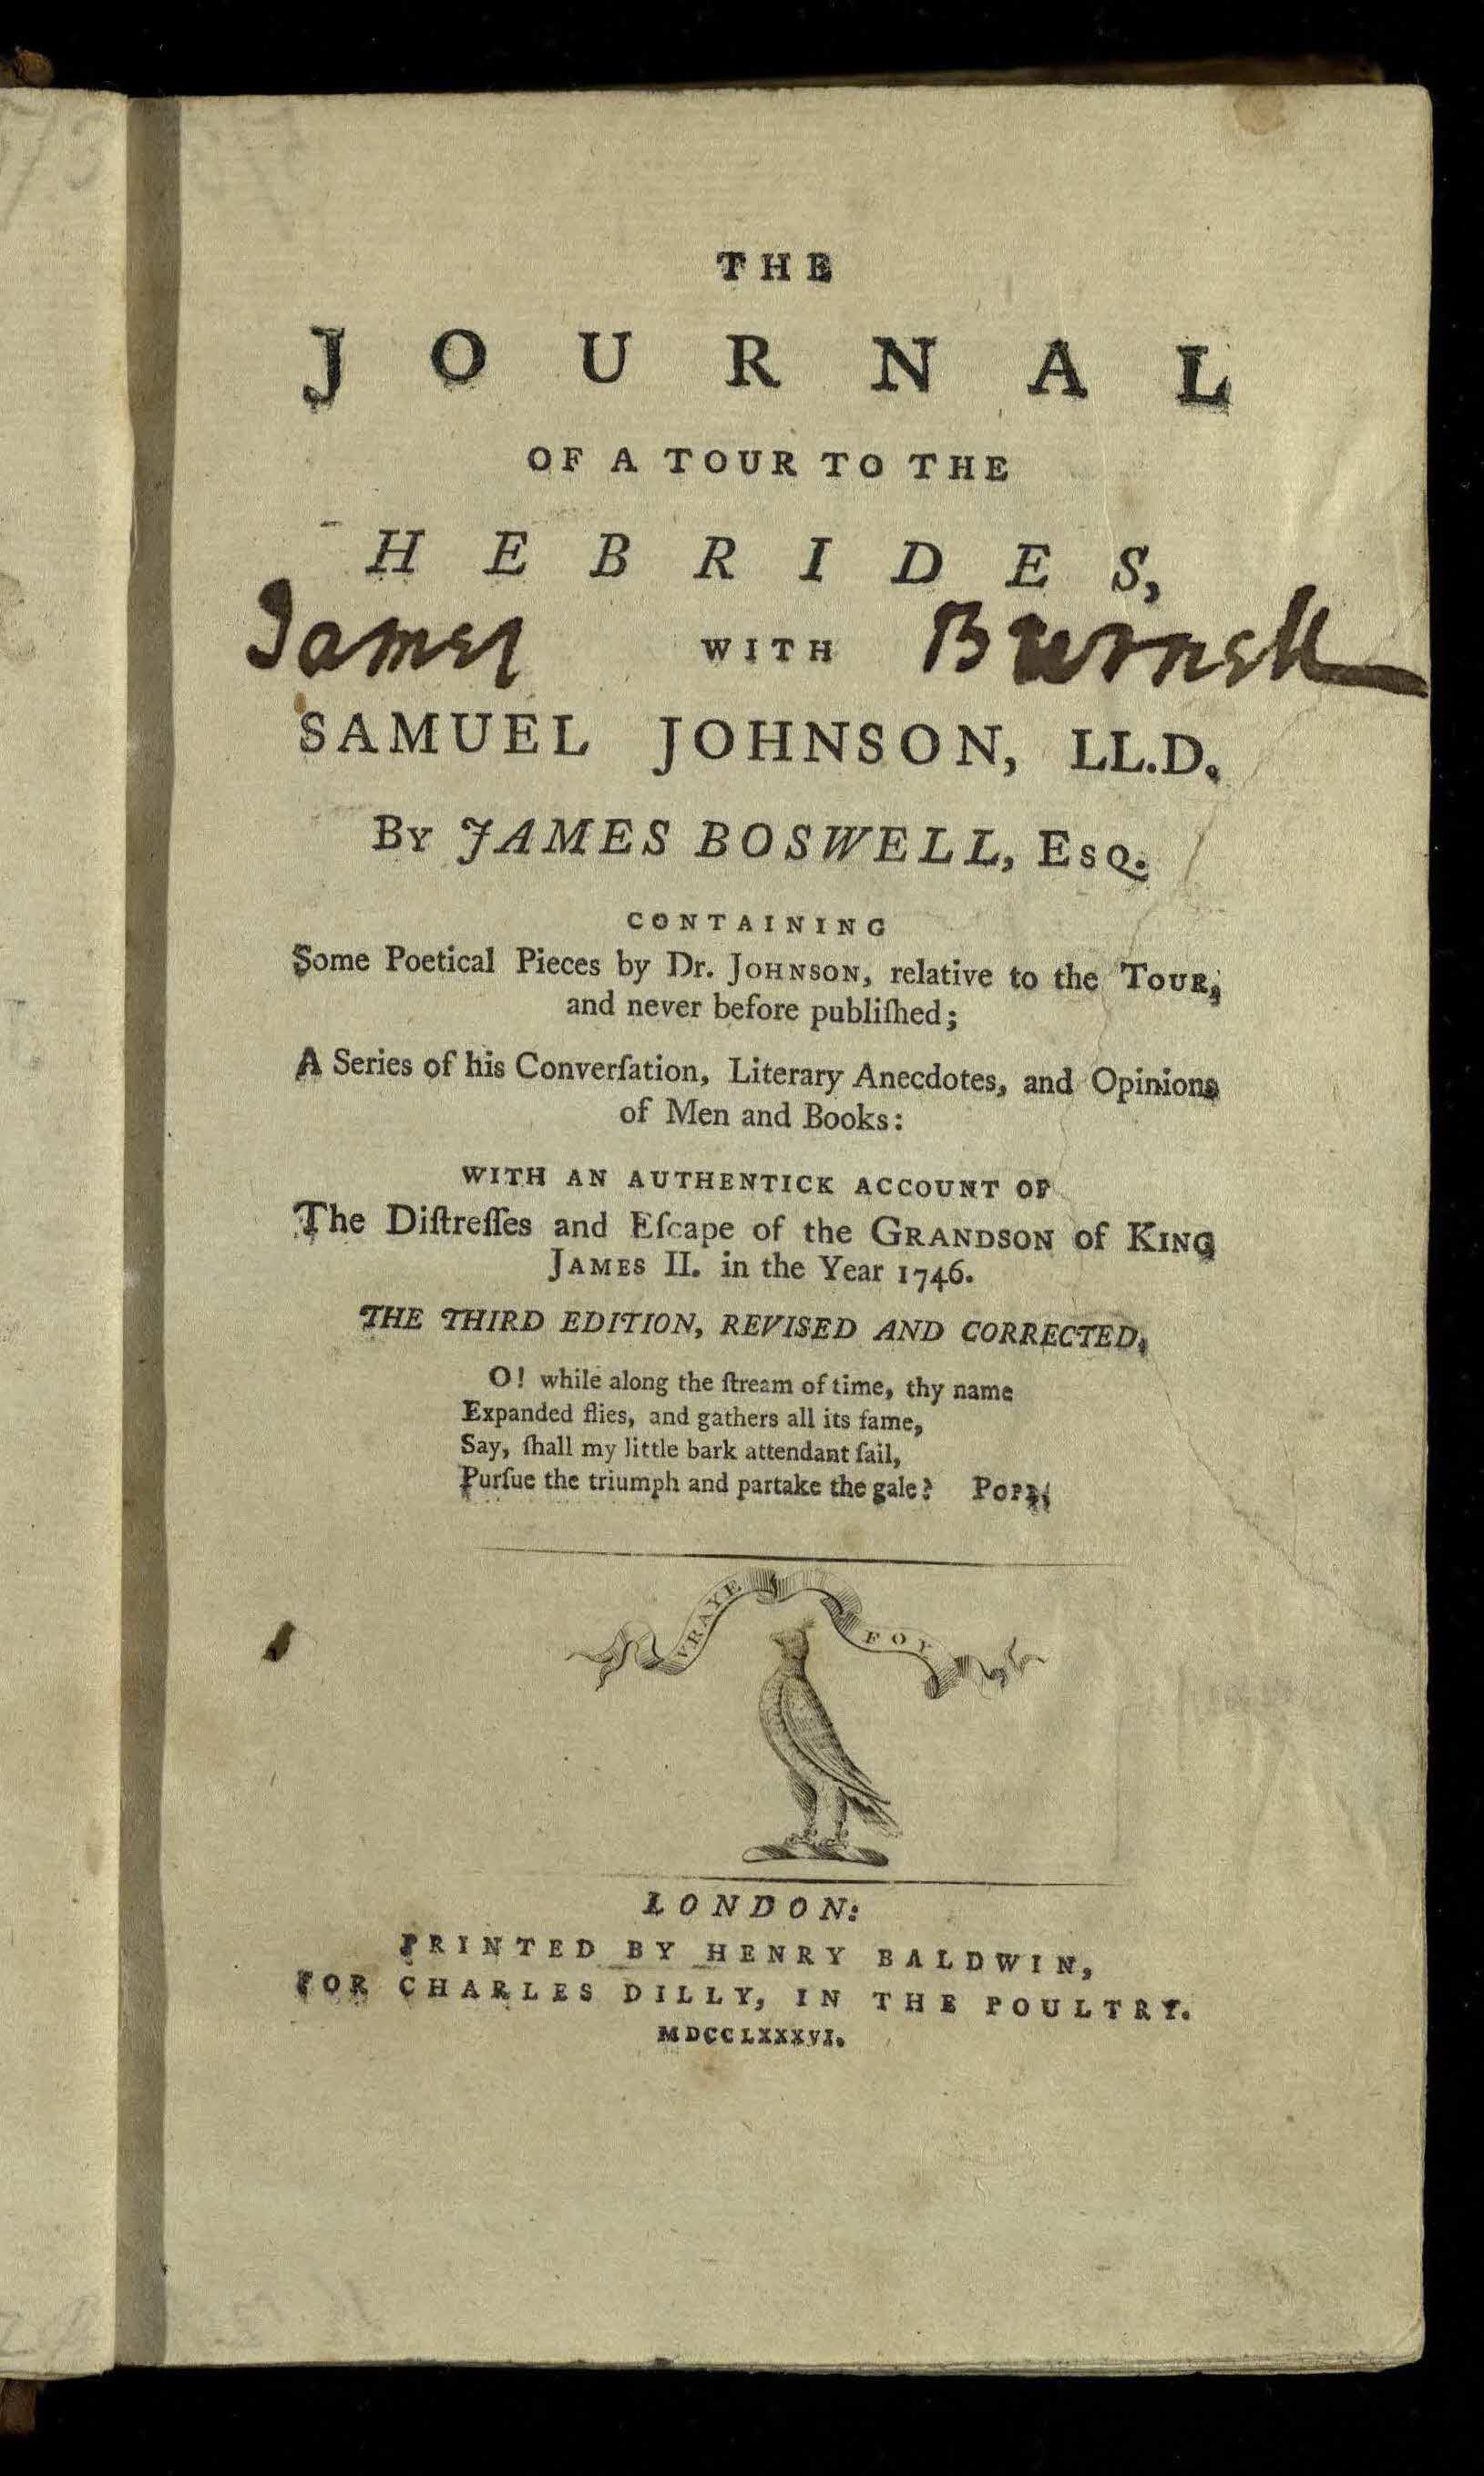 Title page of the third edition (1786) of James Boswell’s The journal of a tour to the Hebrides, with Samuel Johnson, LL.D again published by C. Dilly. Was W. Creech a silent partner is this too? St Andrews copy Fle PR3325.H4D86 (SR).